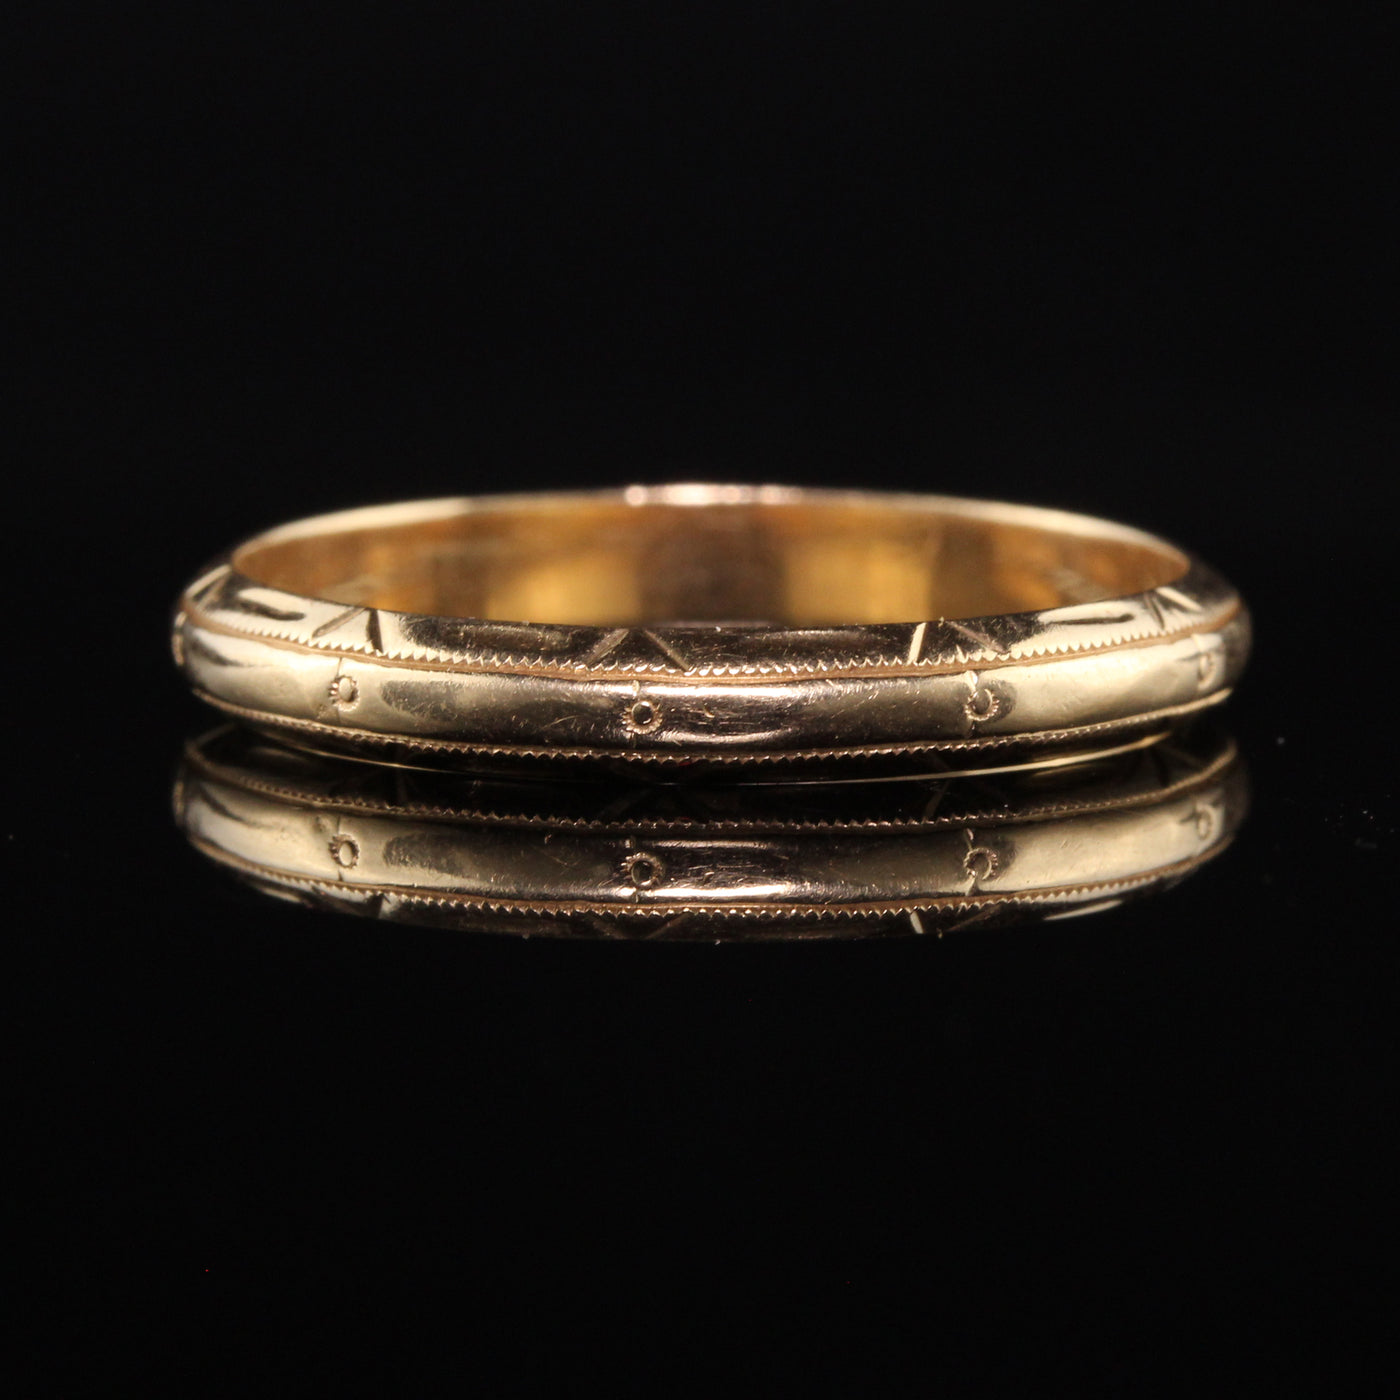 Antique Art Deco 14K Yellow Gold Engraved Wedding Band - Size 9 1/2